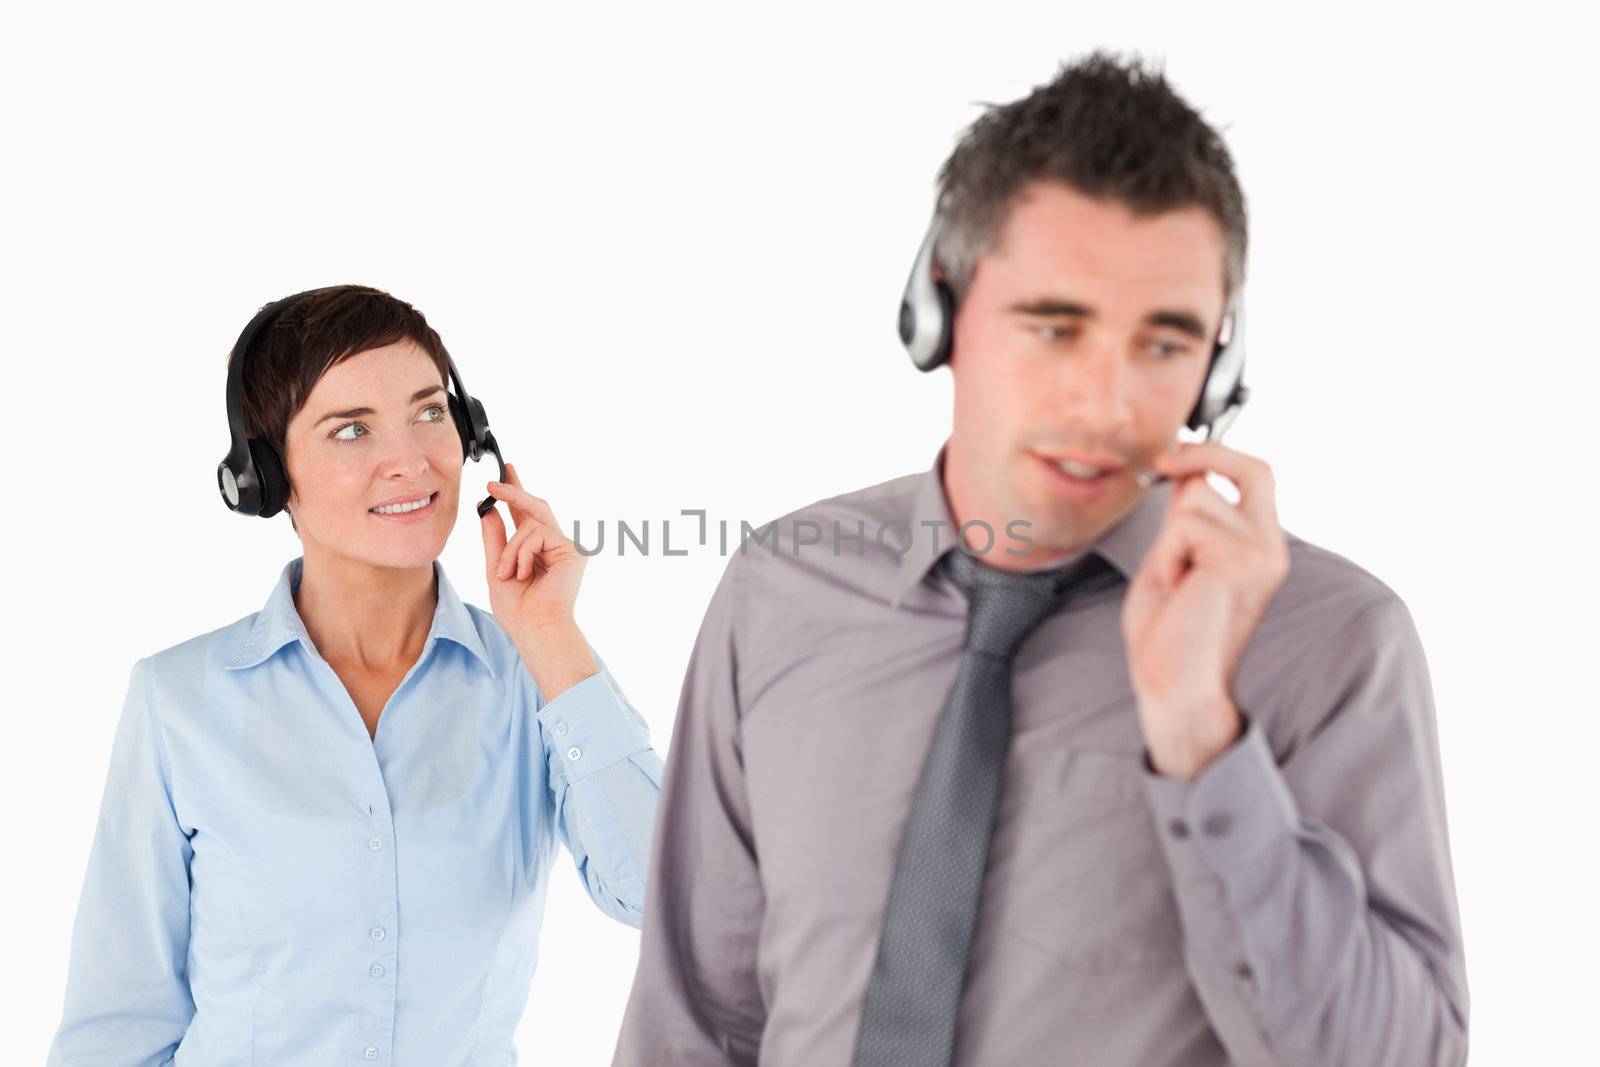 Business people using headsets against a white background